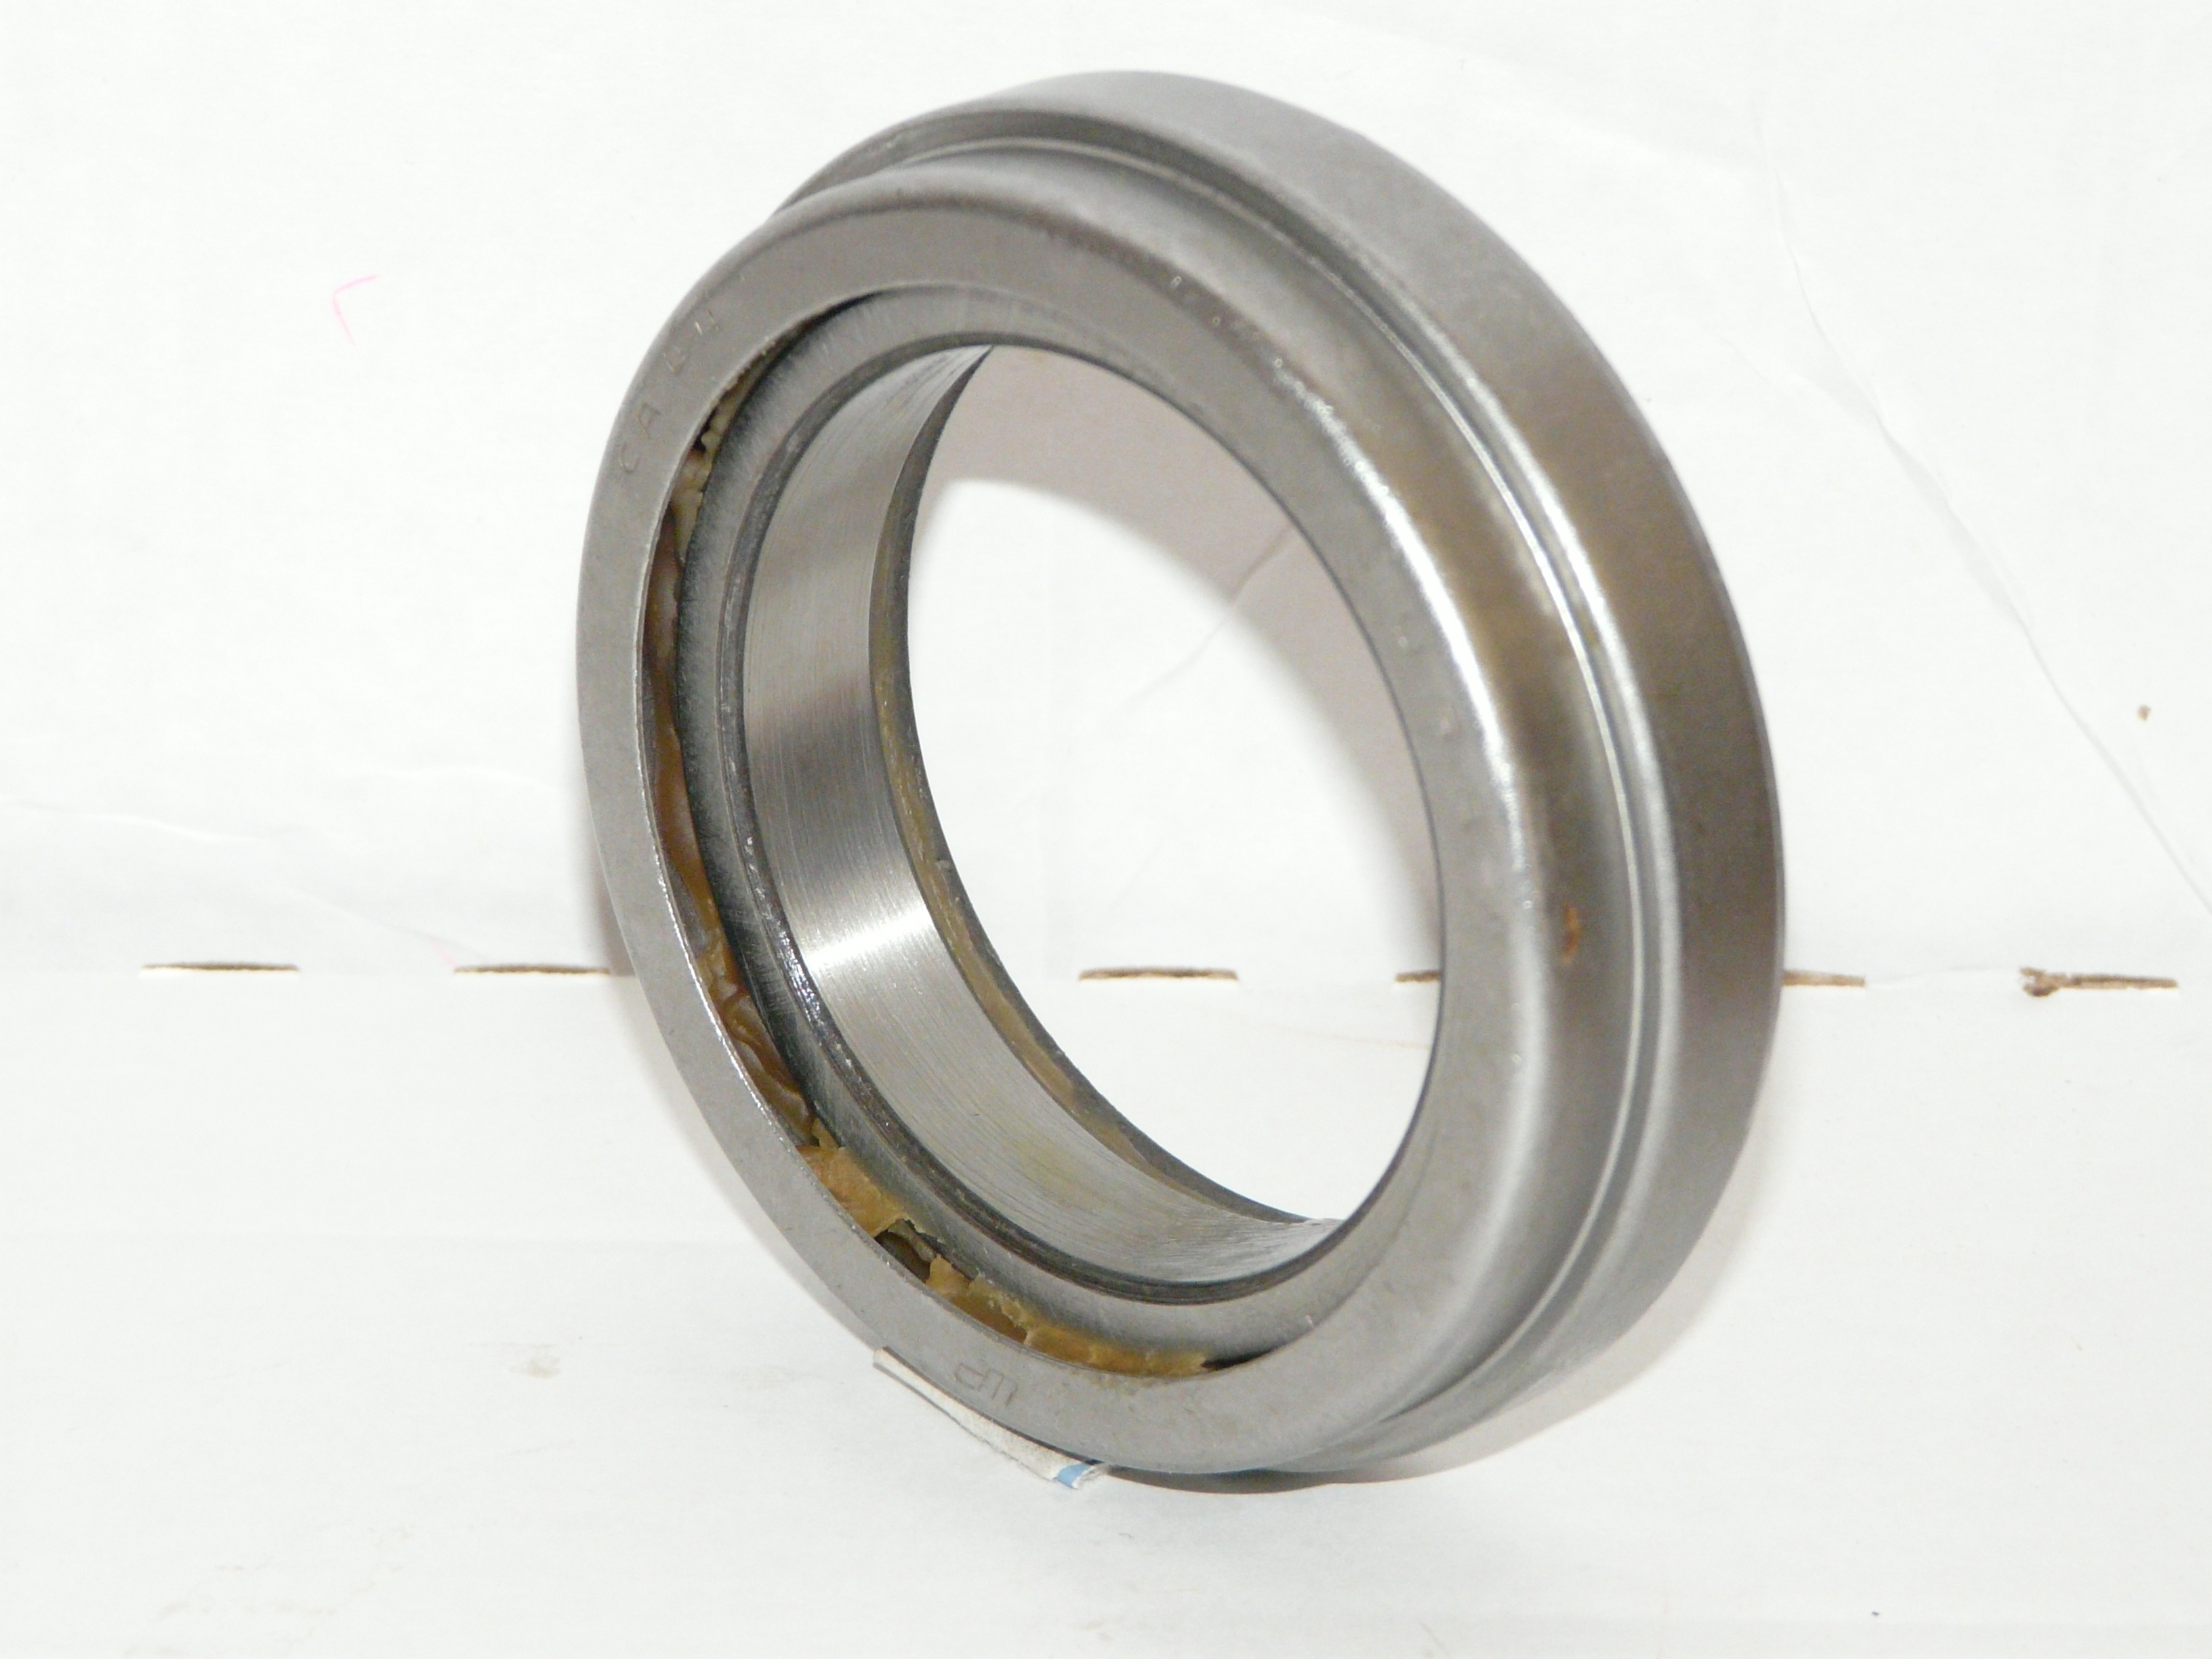 Typical Clutch Release Bearing